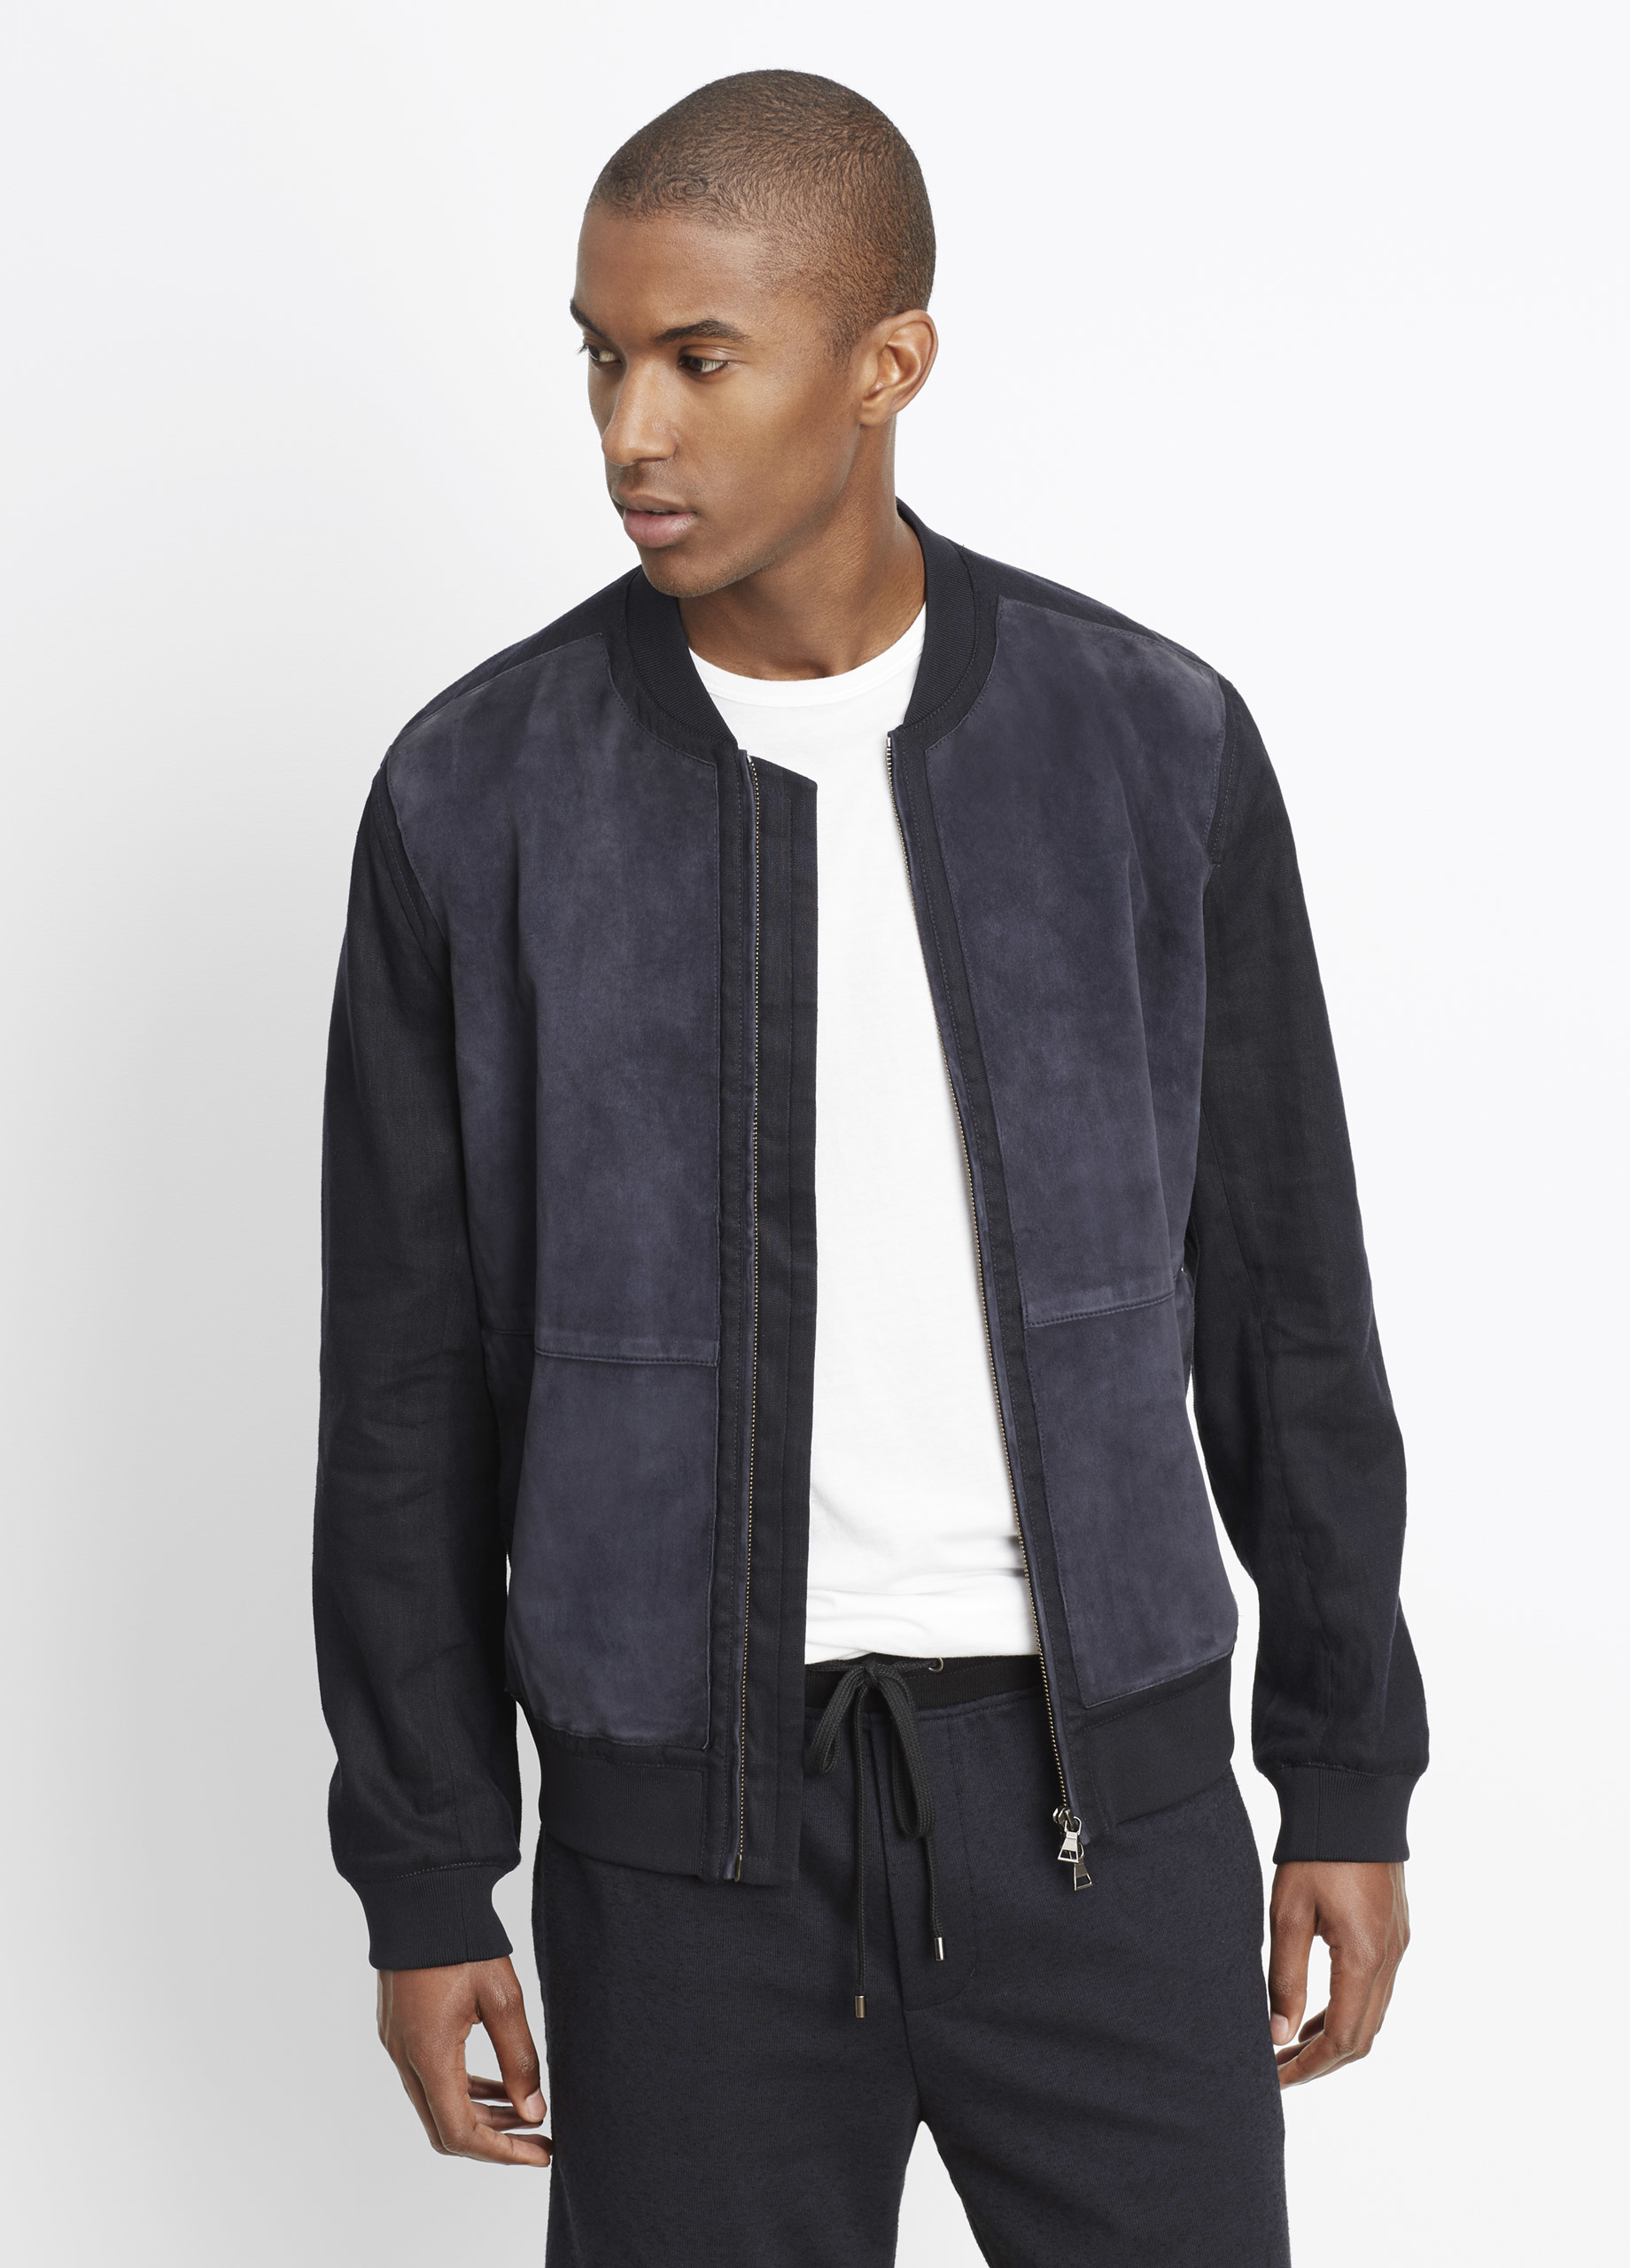 Vince Linen Bomber Jacket With Suede Front in Blue for Men - Lyst